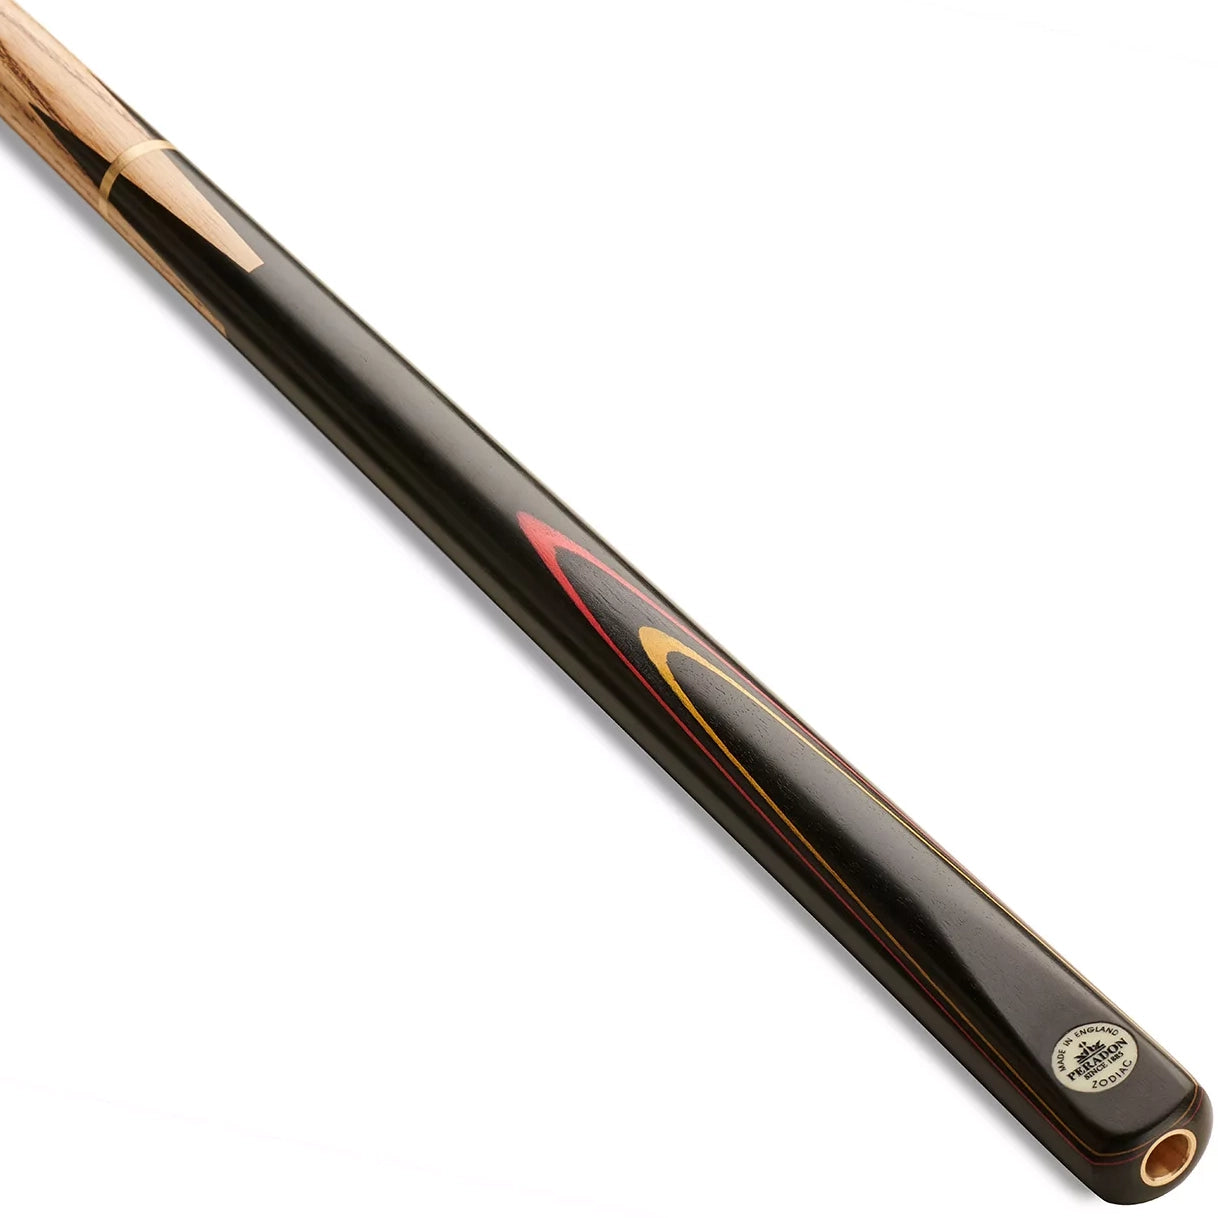 Peradon Zodiac 3/4 Jointed 8 Ball Pool Cue. On angle view